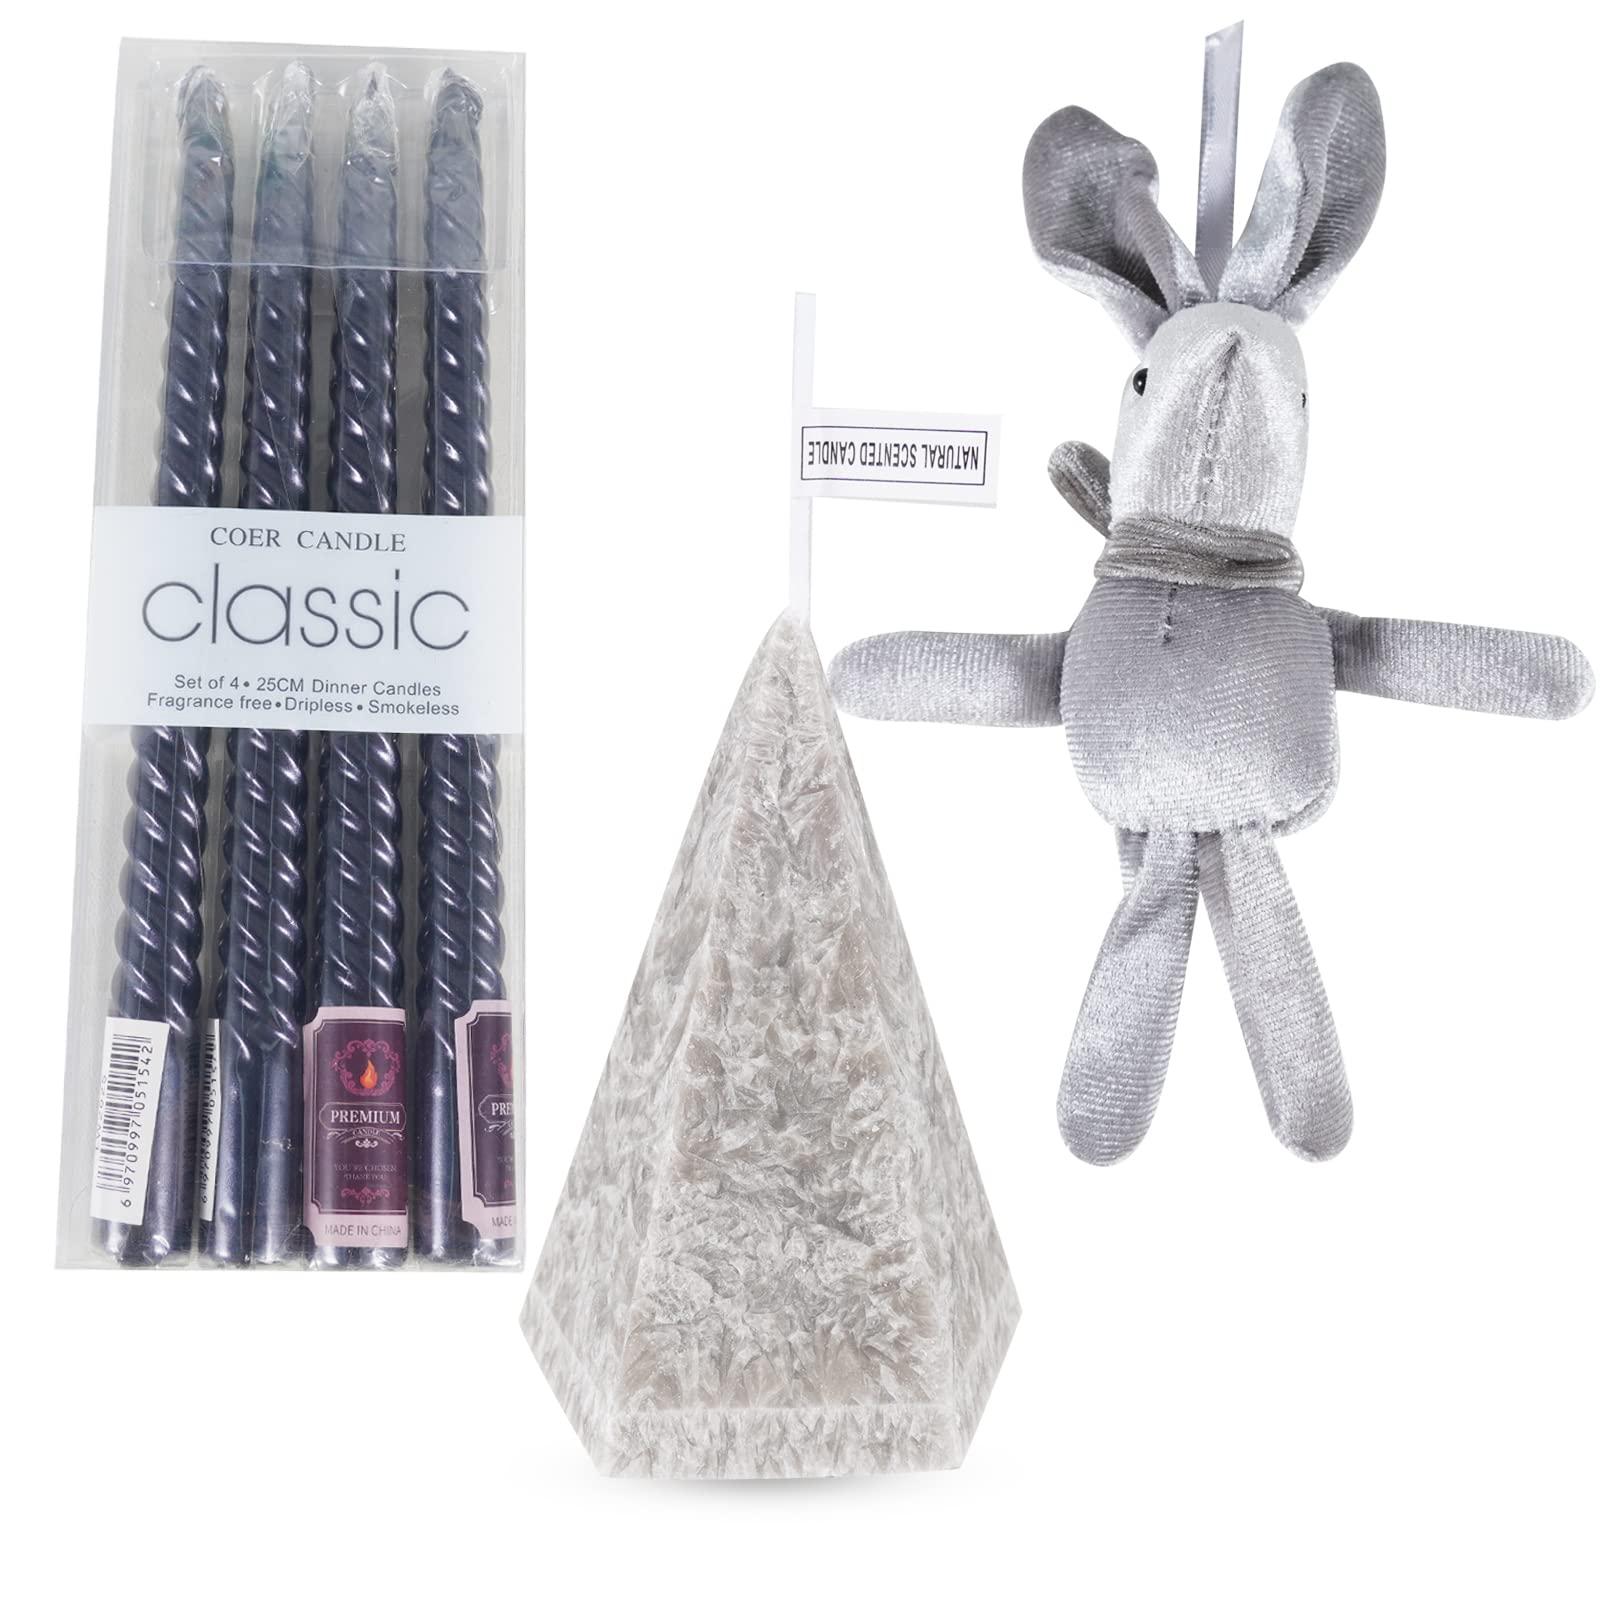 Soulnioi Geometric Cone Scented Candle(Blue Wind Chimes), 4pcs Black Tall Tapered Candle, Velvet Bunny Doll Charm Hanging(Grey), Gifts for Valentine's Day/Birthday/Anniversary 0